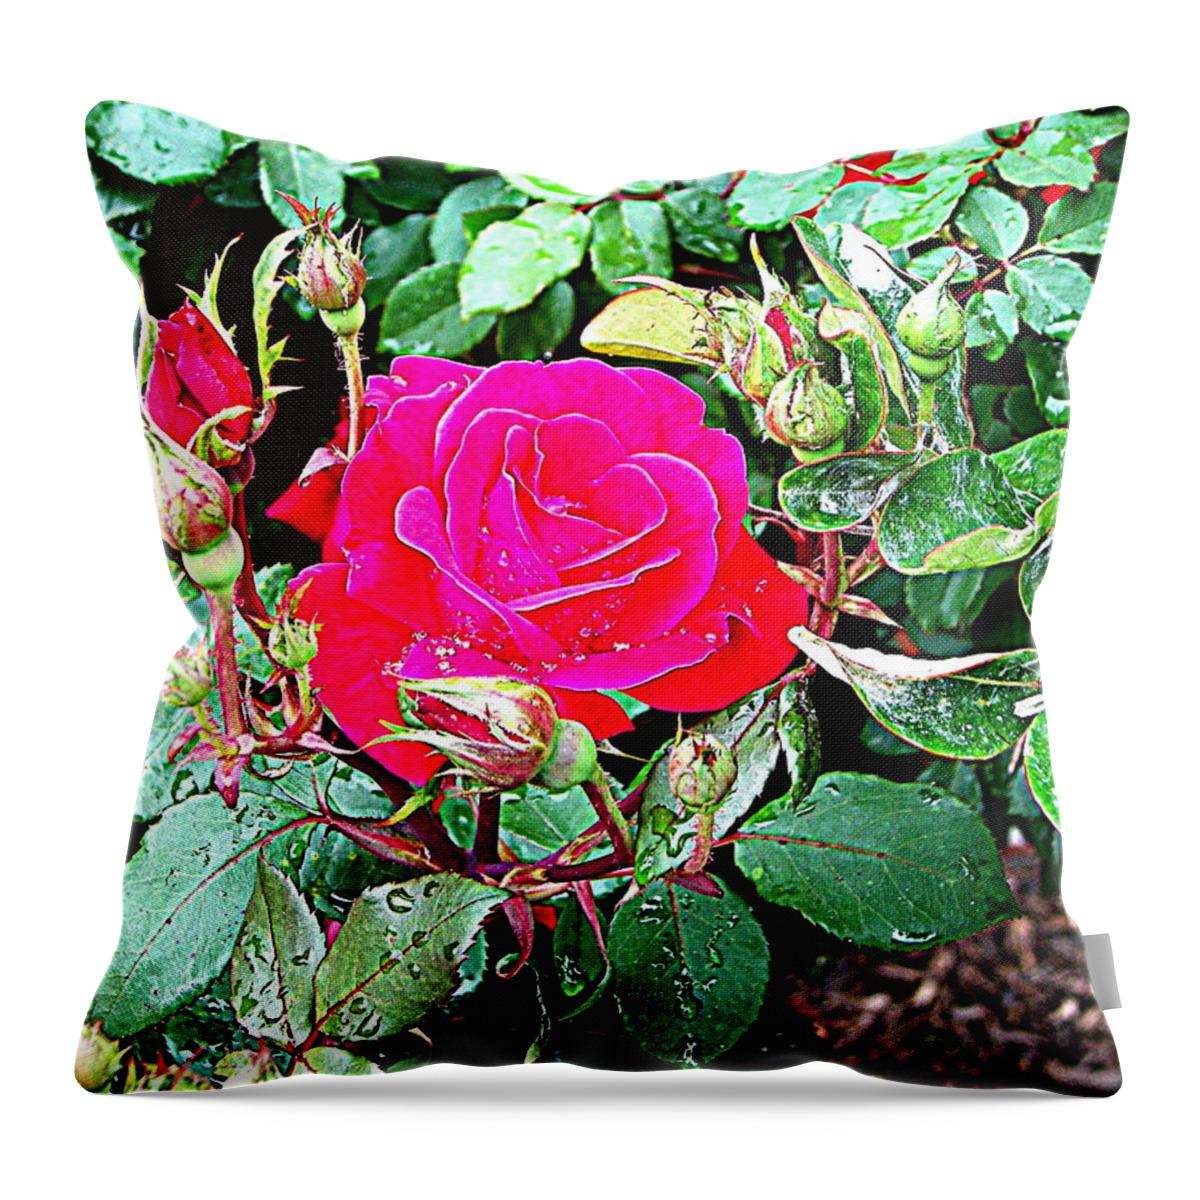 Rose Throw Pillow featuring the photograph After The Rain by Pamela Hyde Wilson